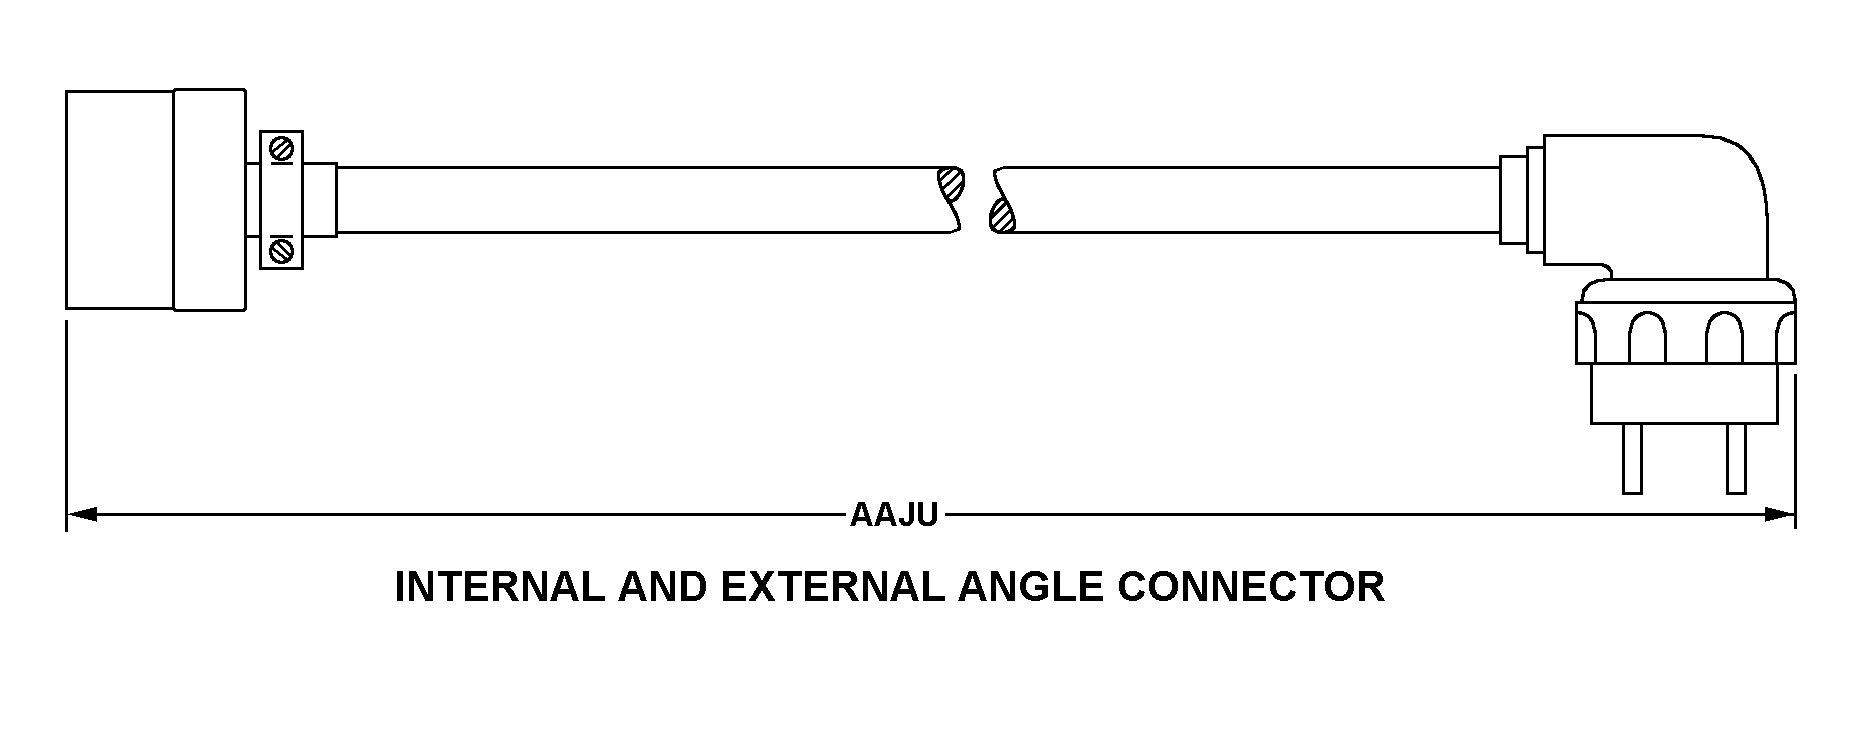 INTERNAL AND EXTERNAL ANGLE CONNECTOR style nsn 4927-01-135-9552